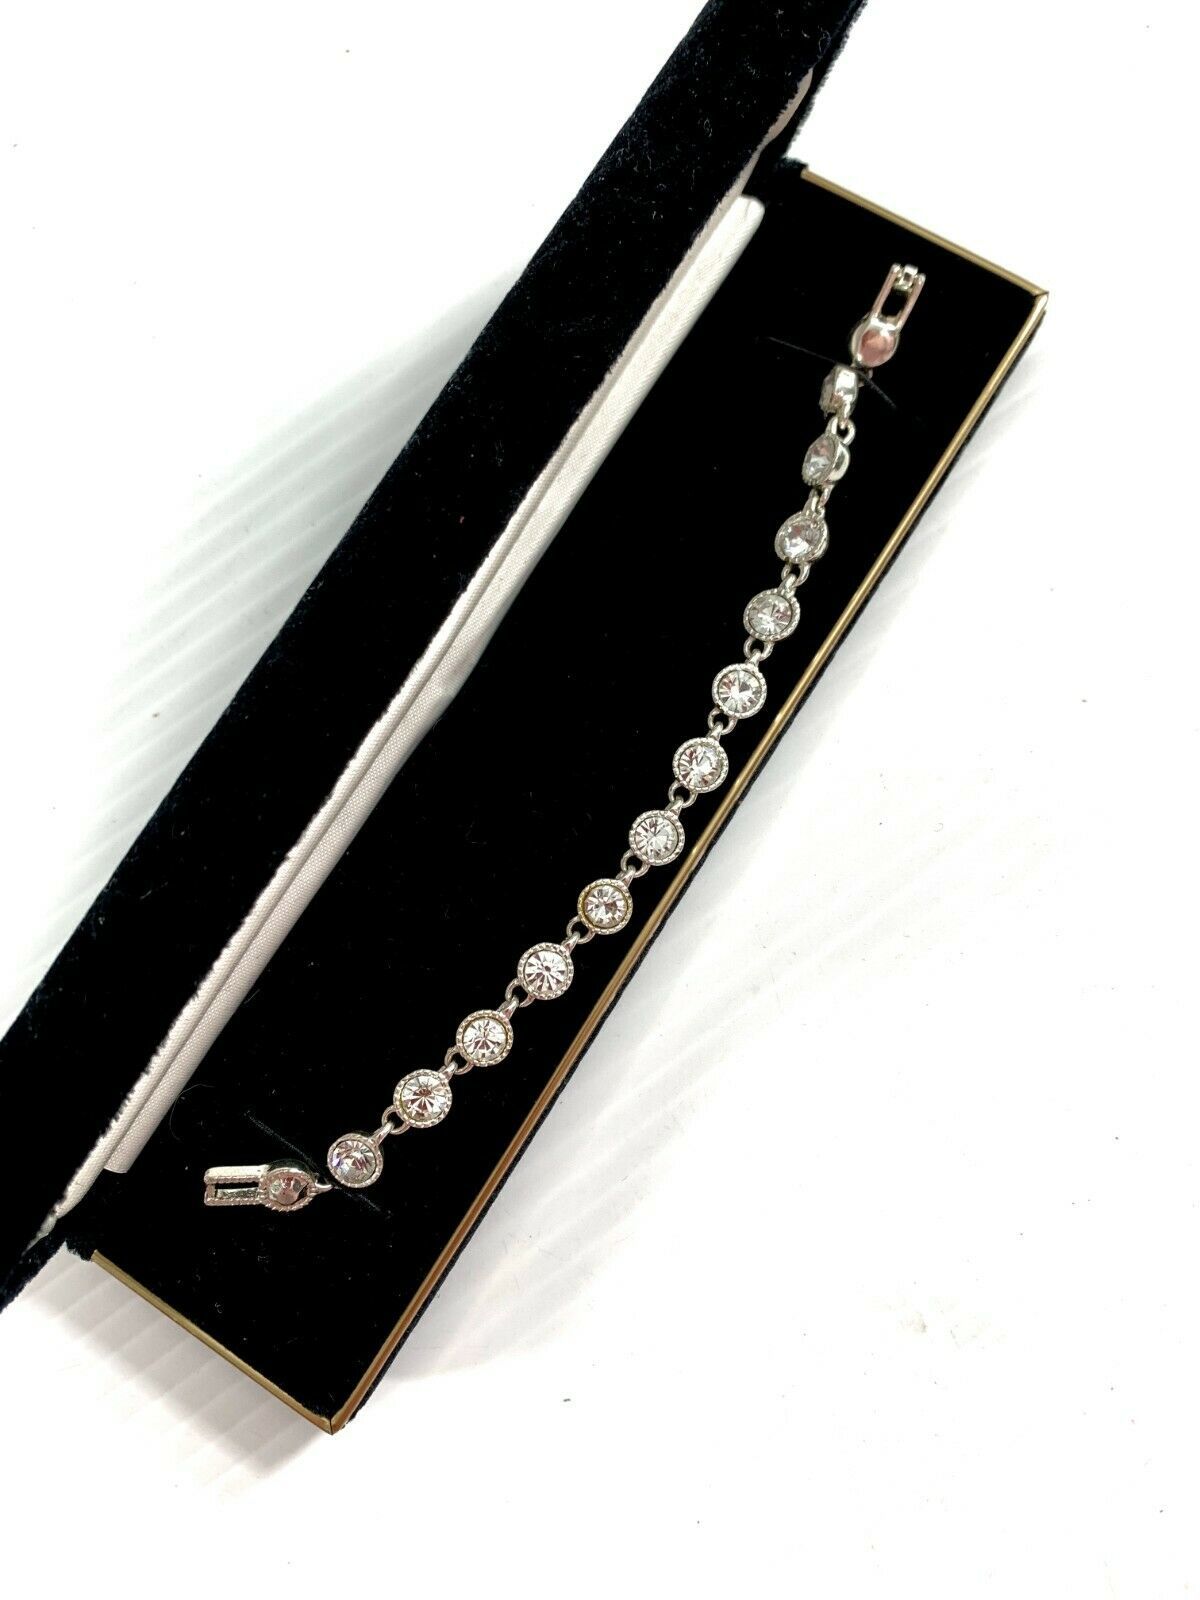 Primary image for Vintage 1980s Avon SAQ Faceted Crystal Tennis Bracelet Silver Tone Bling